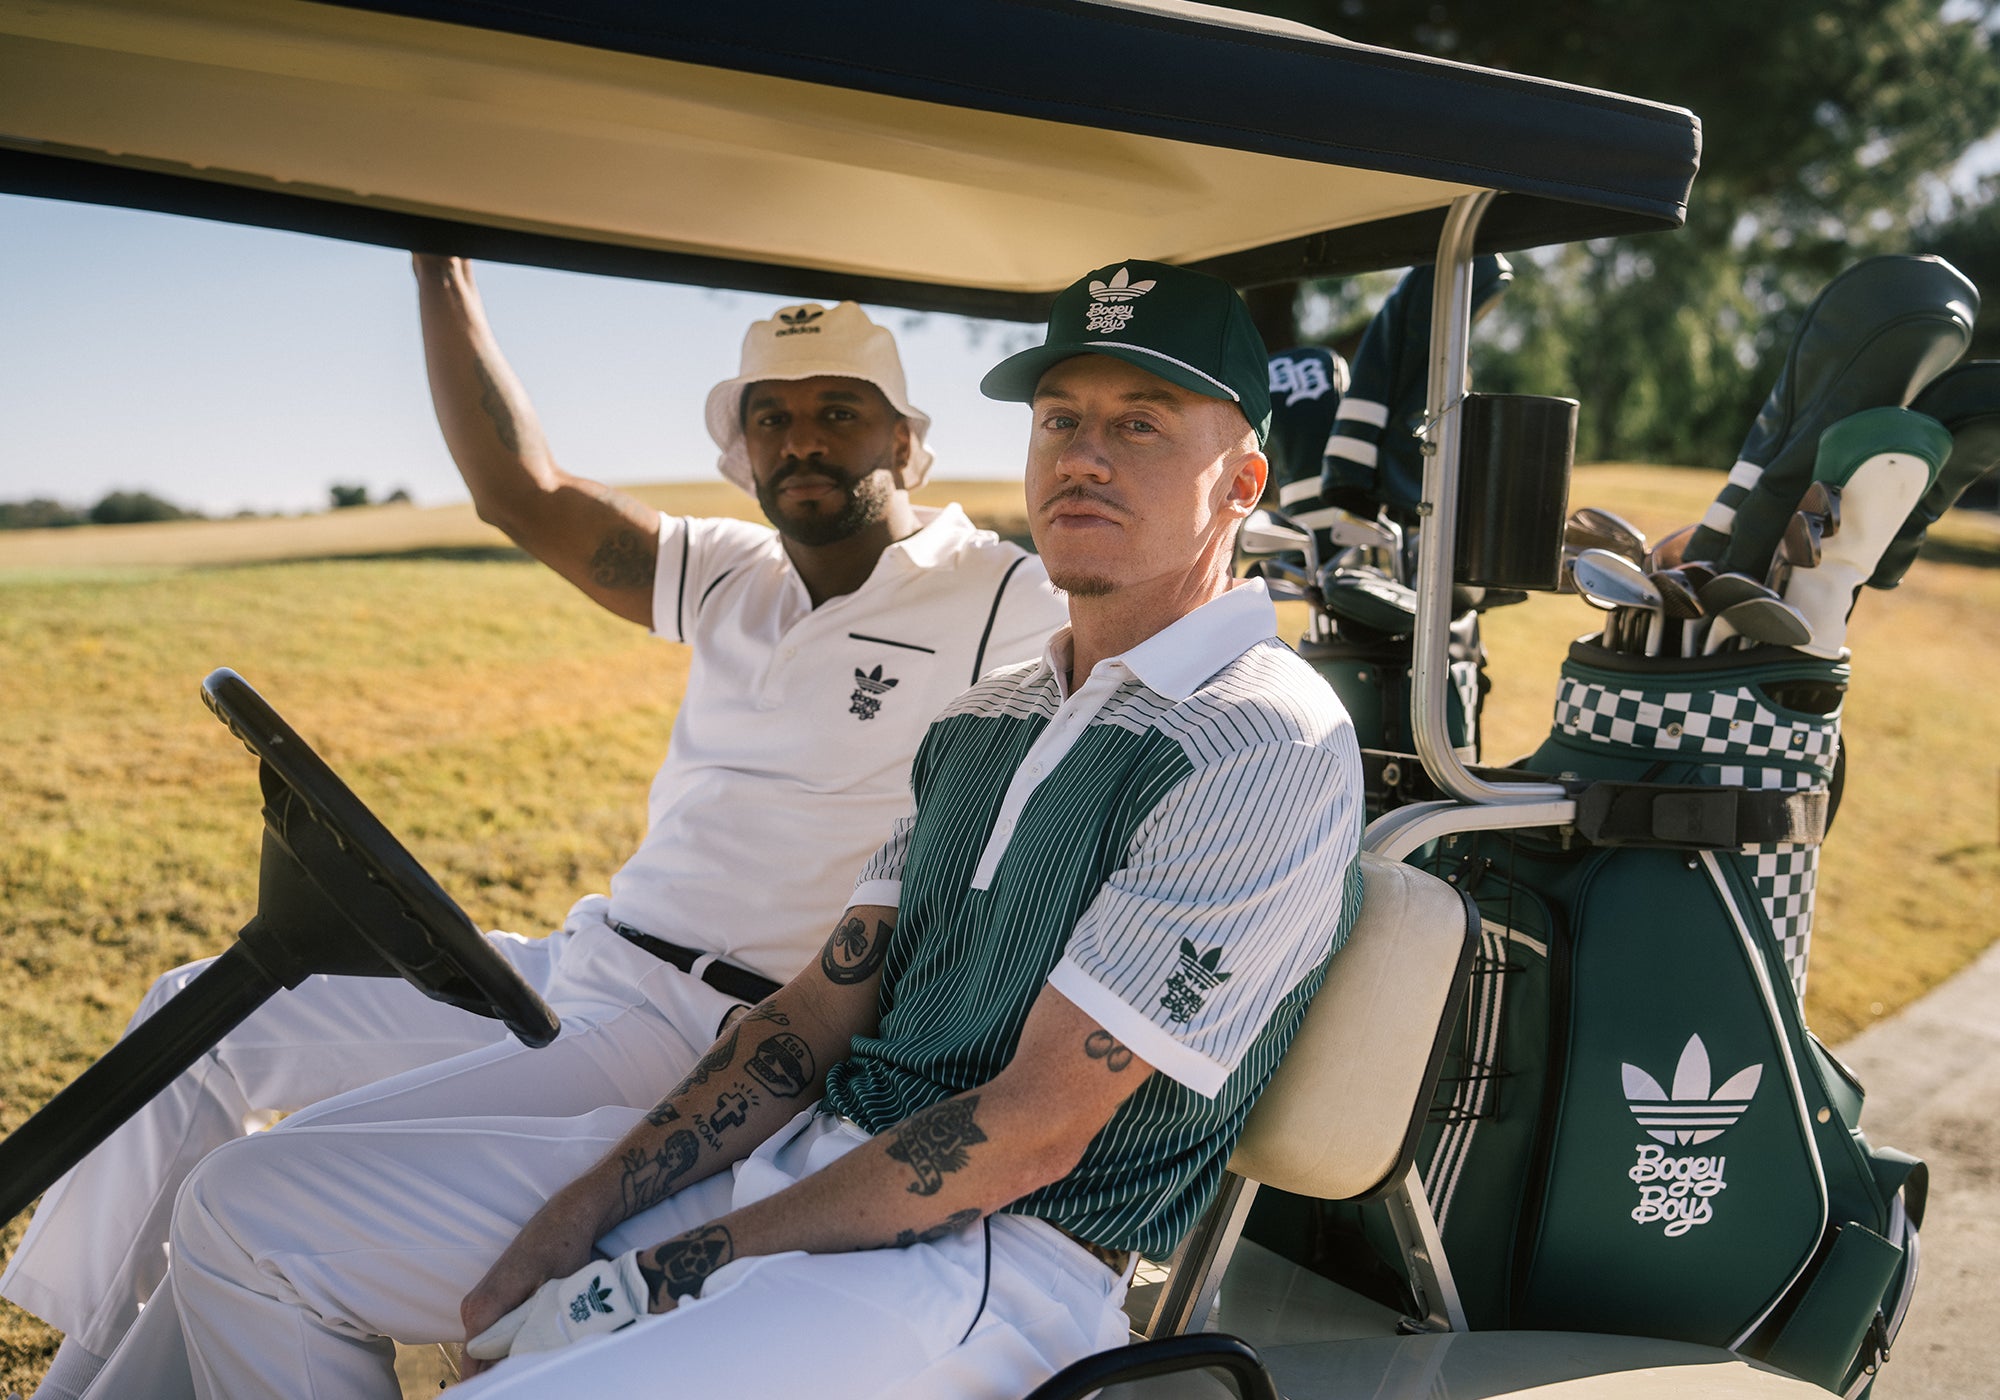 adidas x Bogey Boys | Macklemore's Style Meets Performance & Function18